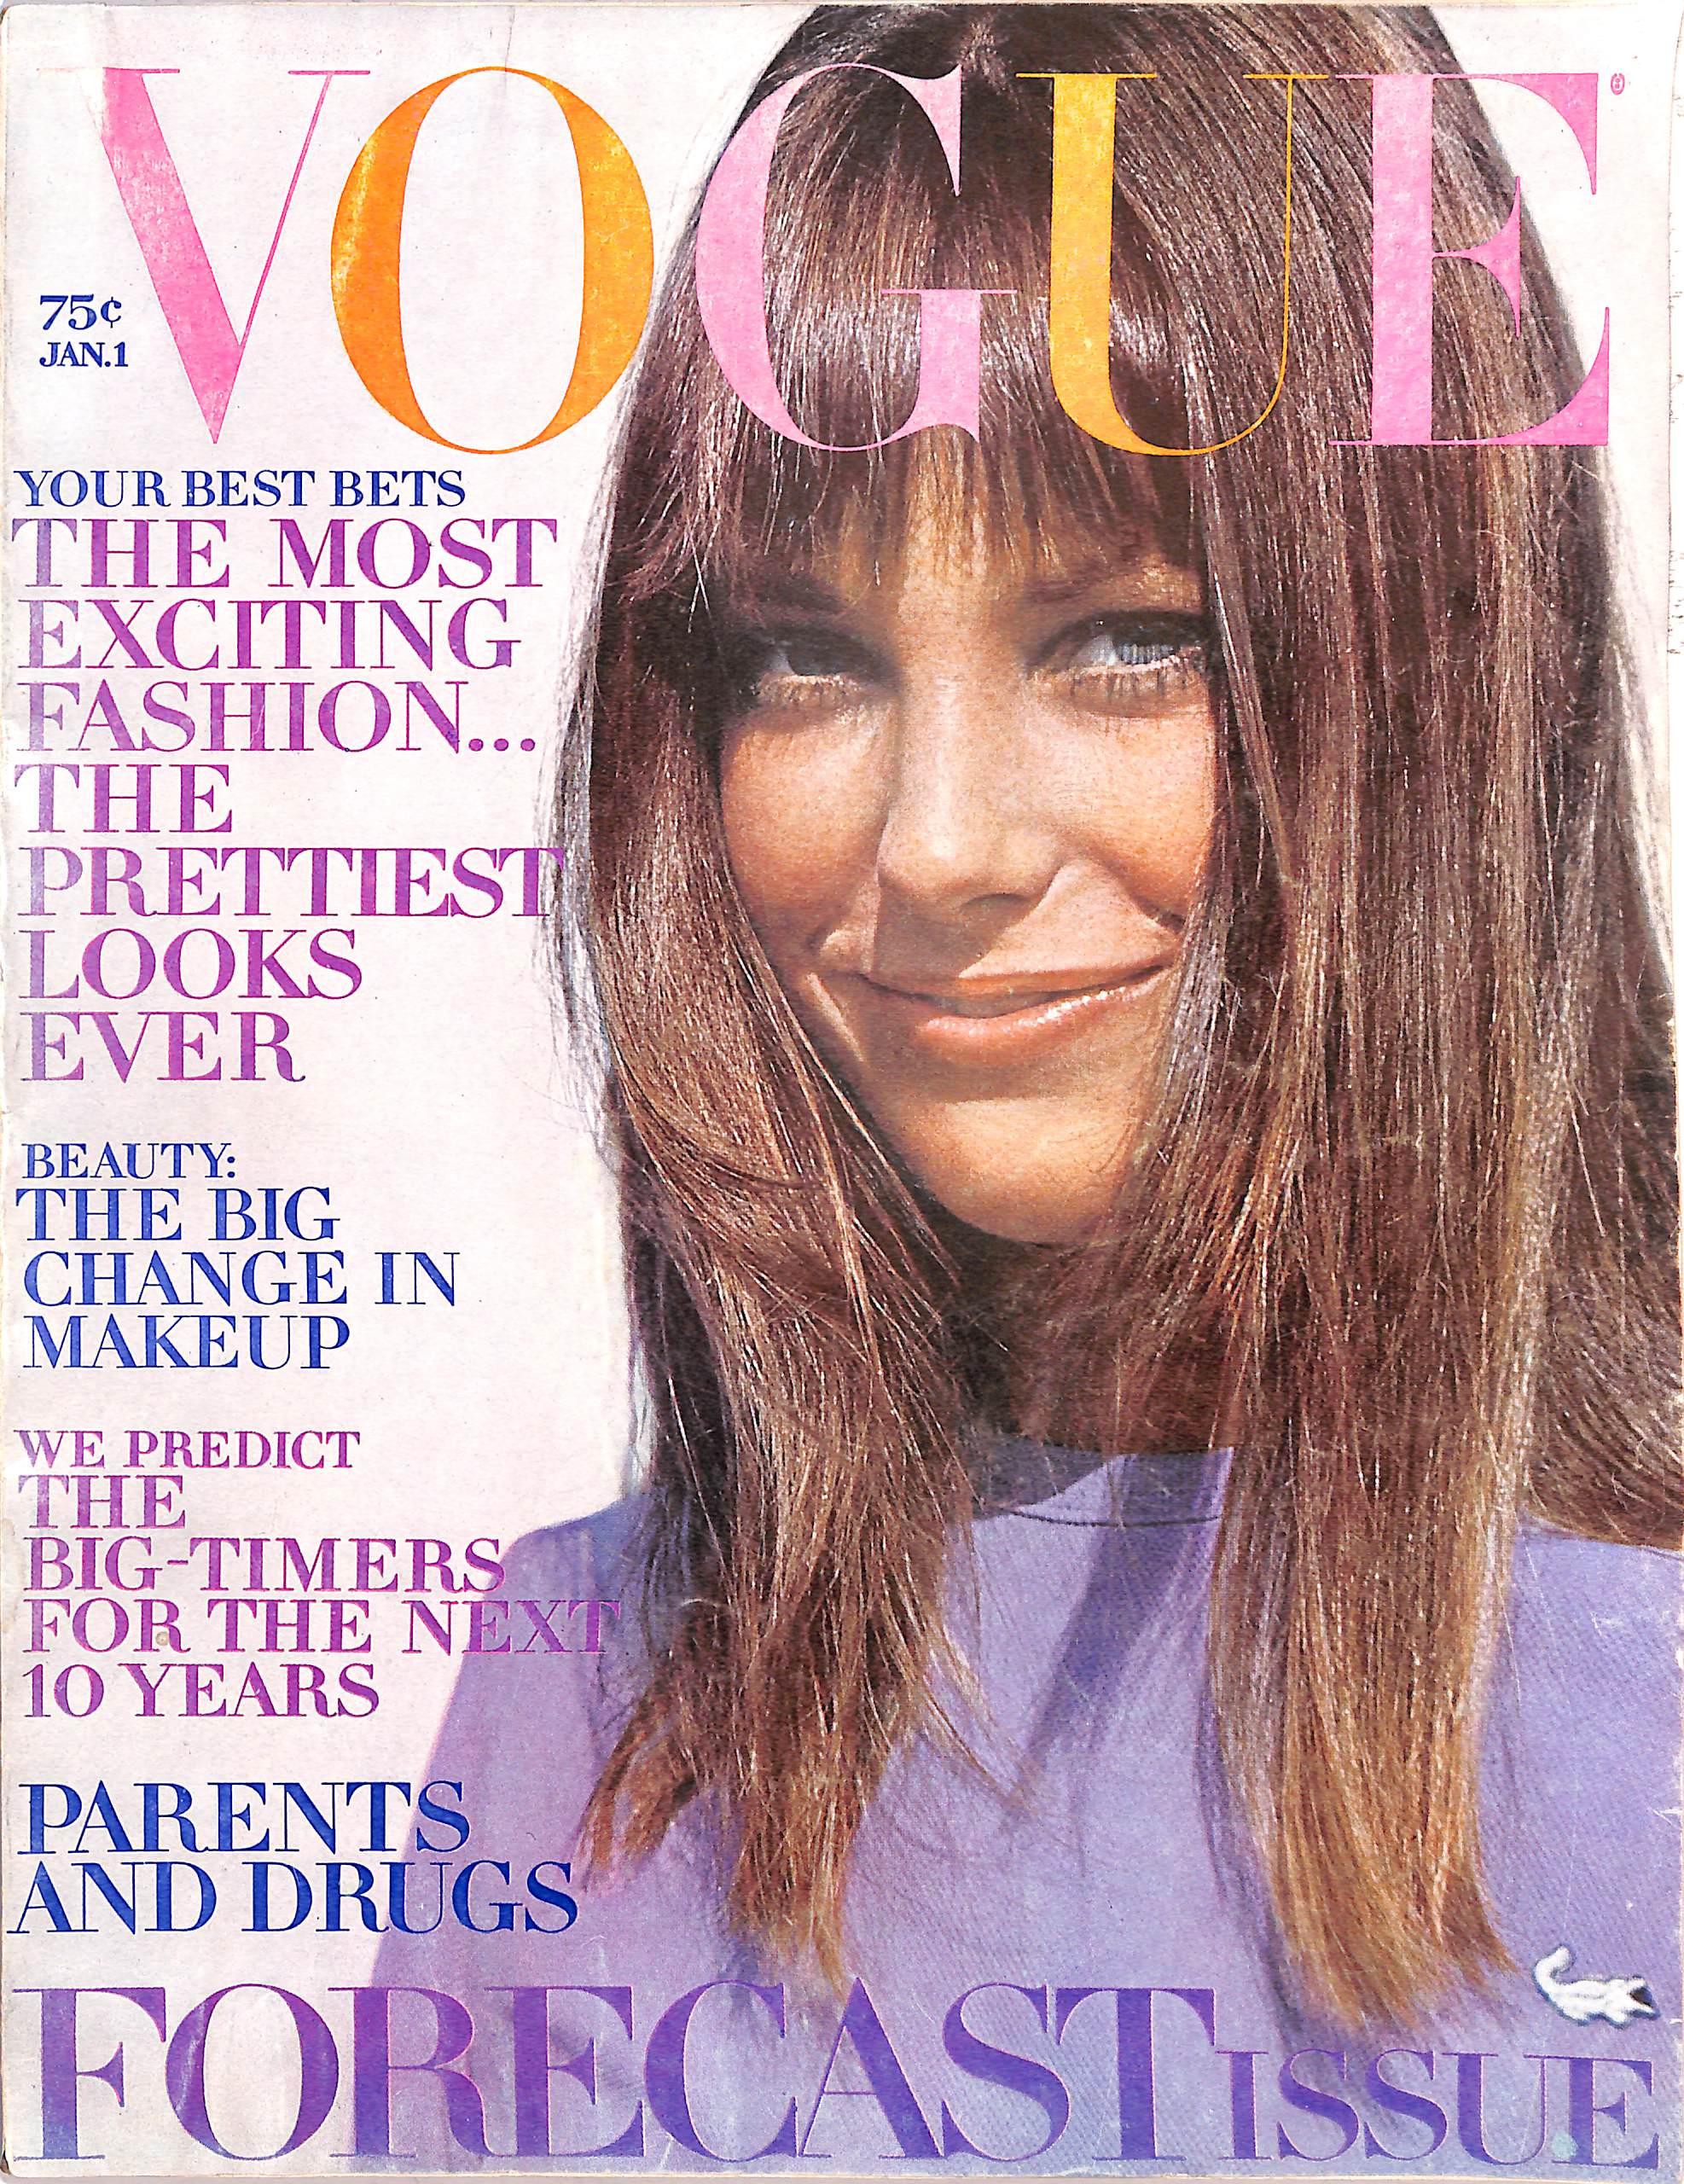 "Vogue January 1, 1970 w/ Jane Birkin on Cover" - Mixed Media Art by Unknown